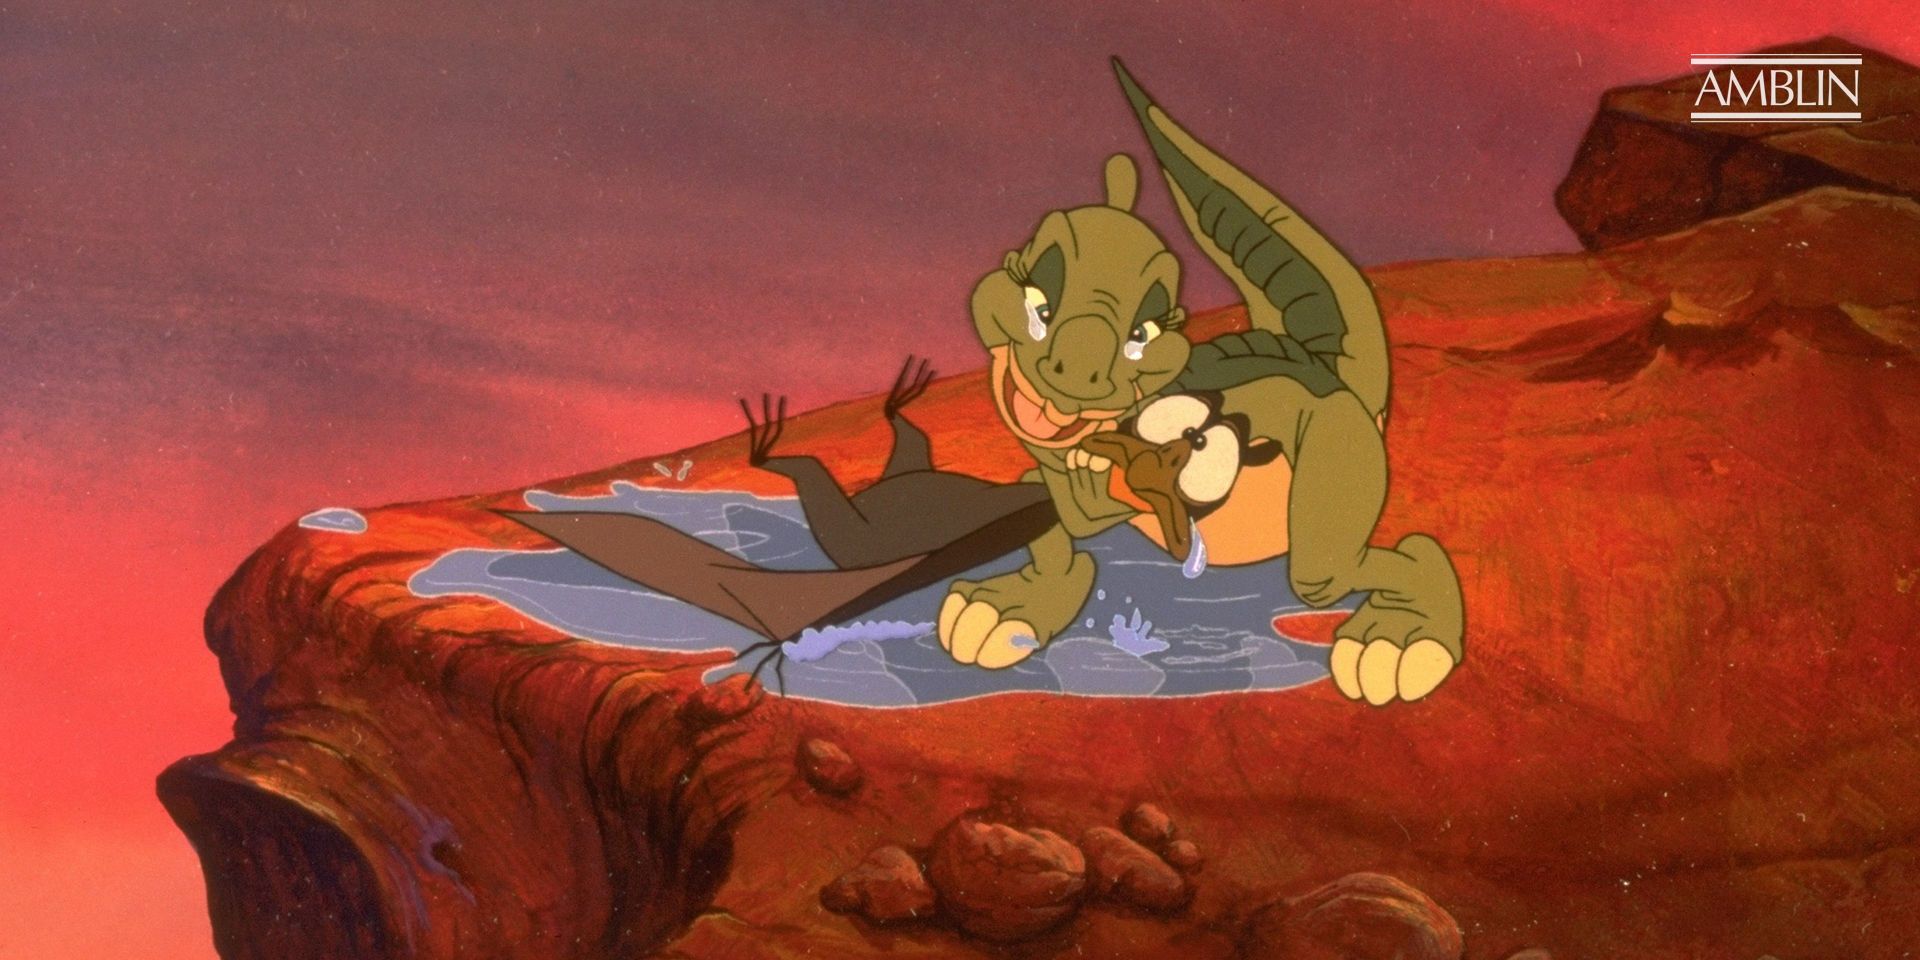 Ducky hugging Petrie in The Land Before Time